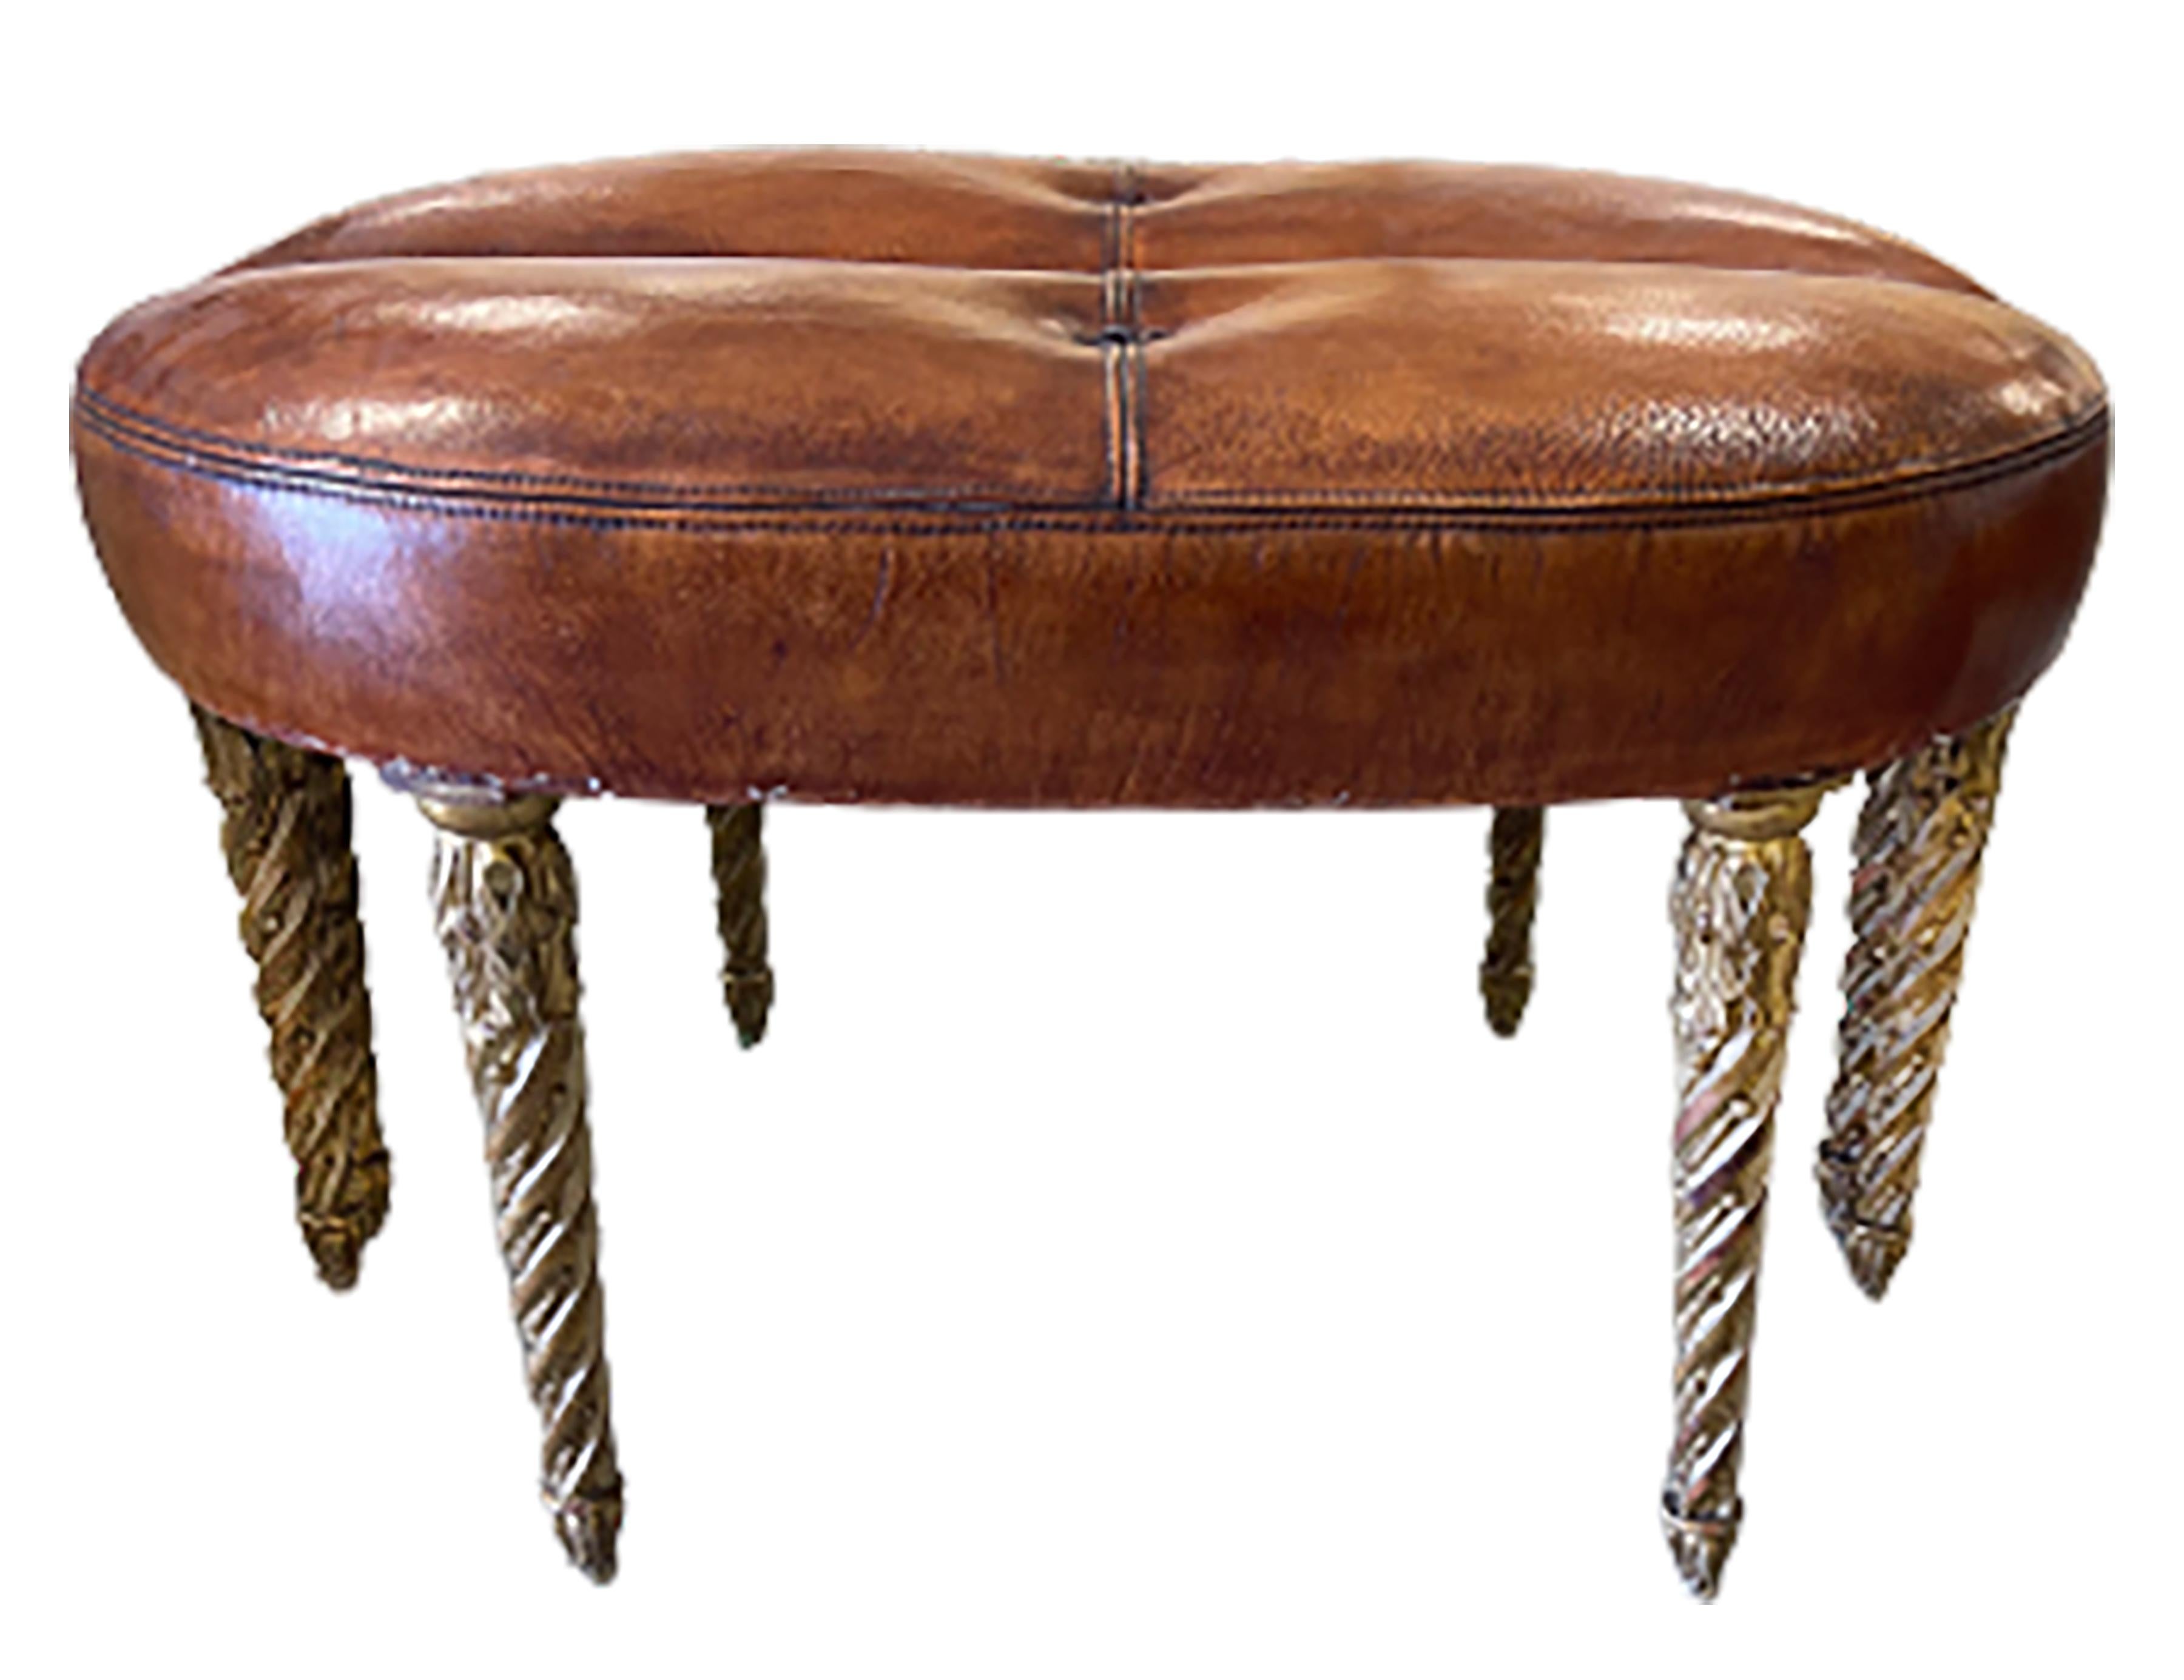 Pair of handsome demi lune vintage Louis XVI leather ottoman stools. Covered in cognac colored leather and tufted in the middle. The gilt wood legs are carved in a spiral design. Paired together the stools form a circle. Structure of the pair was